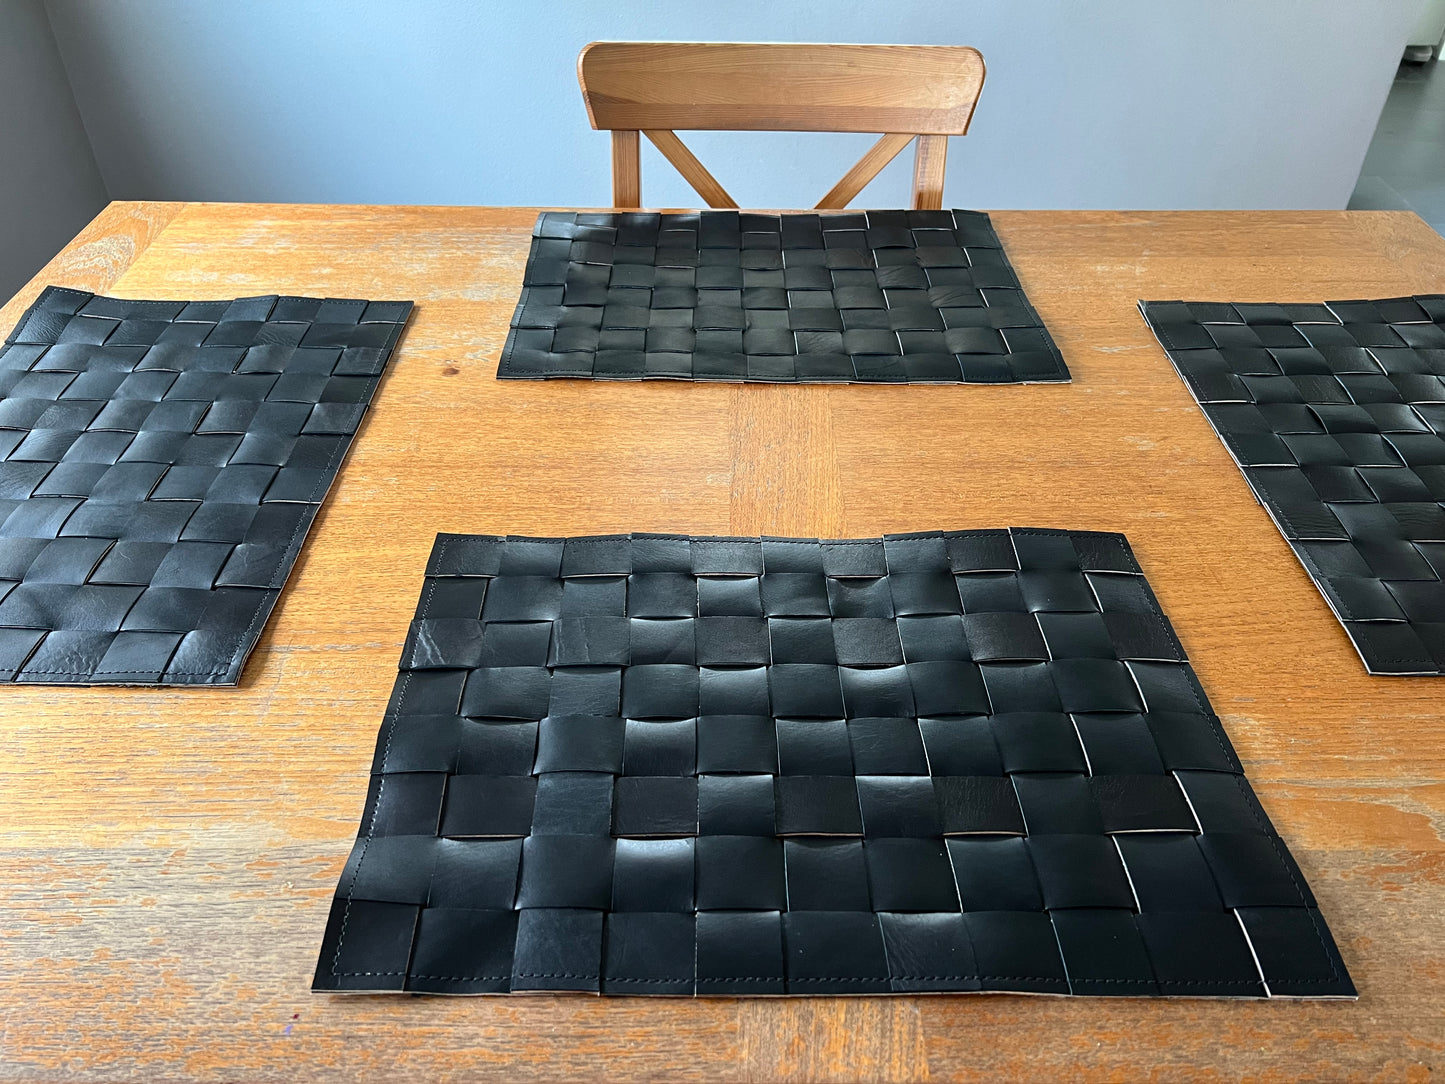 Woven black leather placemats gleam on a wooden table.